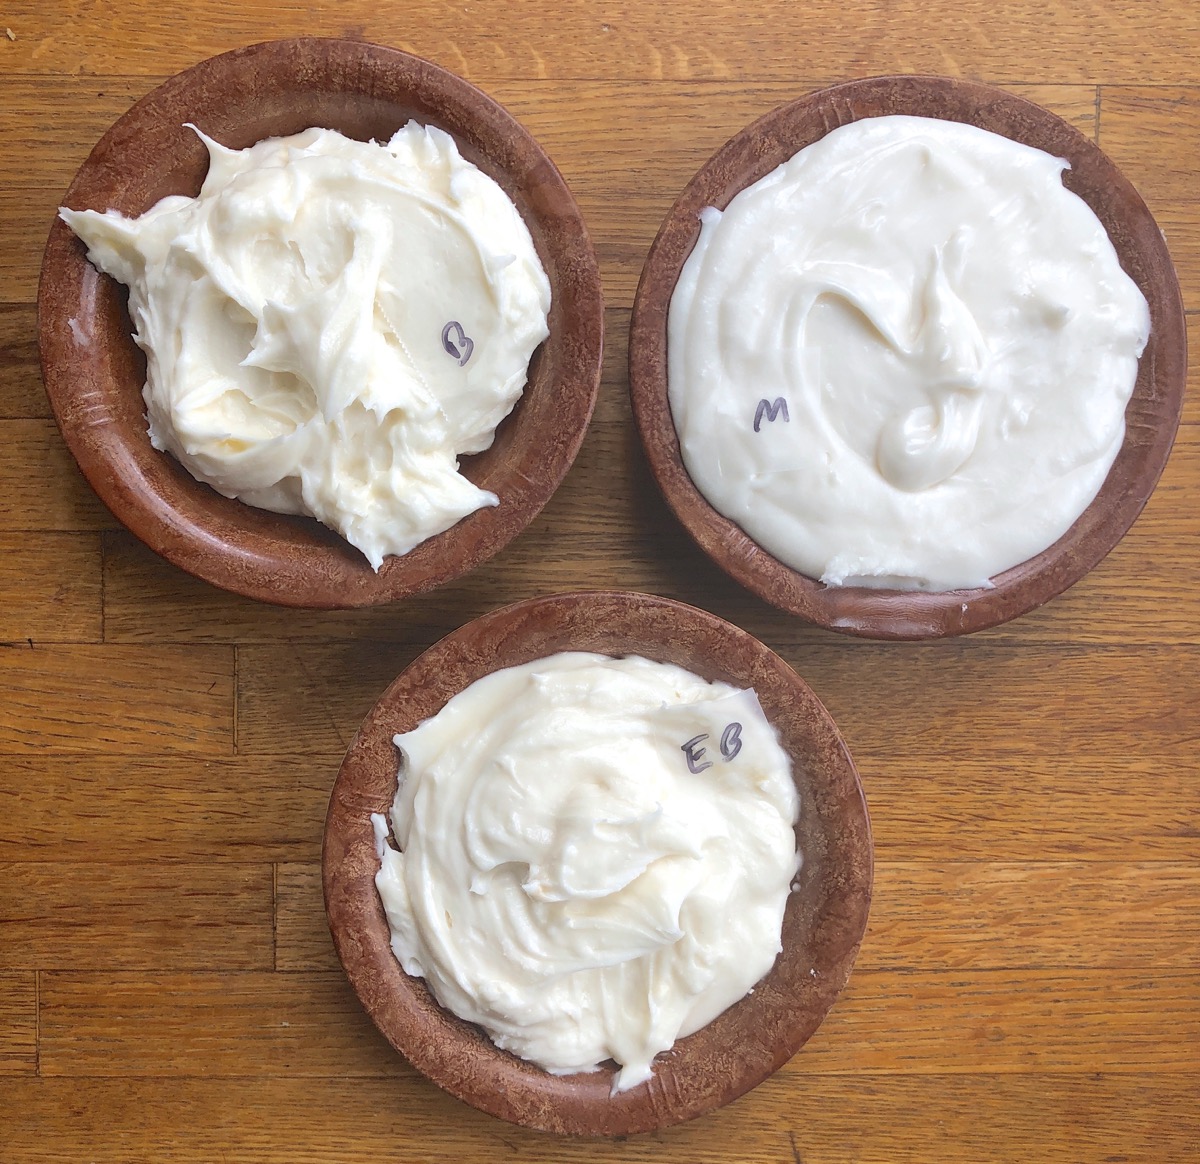 Buttercream frosting in three small bowls, each made with a different type of butter to show differences in color and texture.